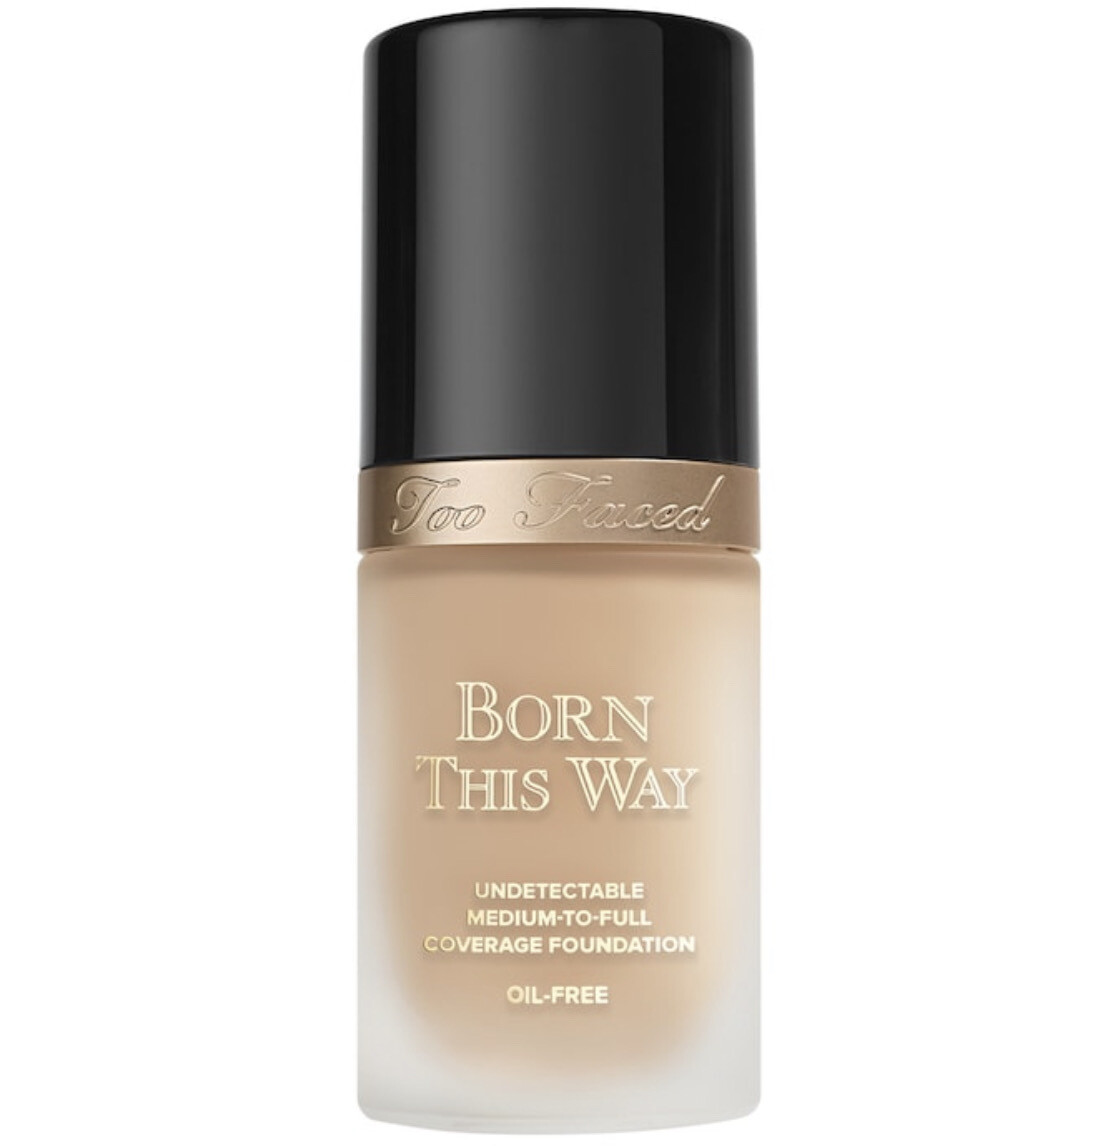 Too Faced - Born This Way Foundation | Nude